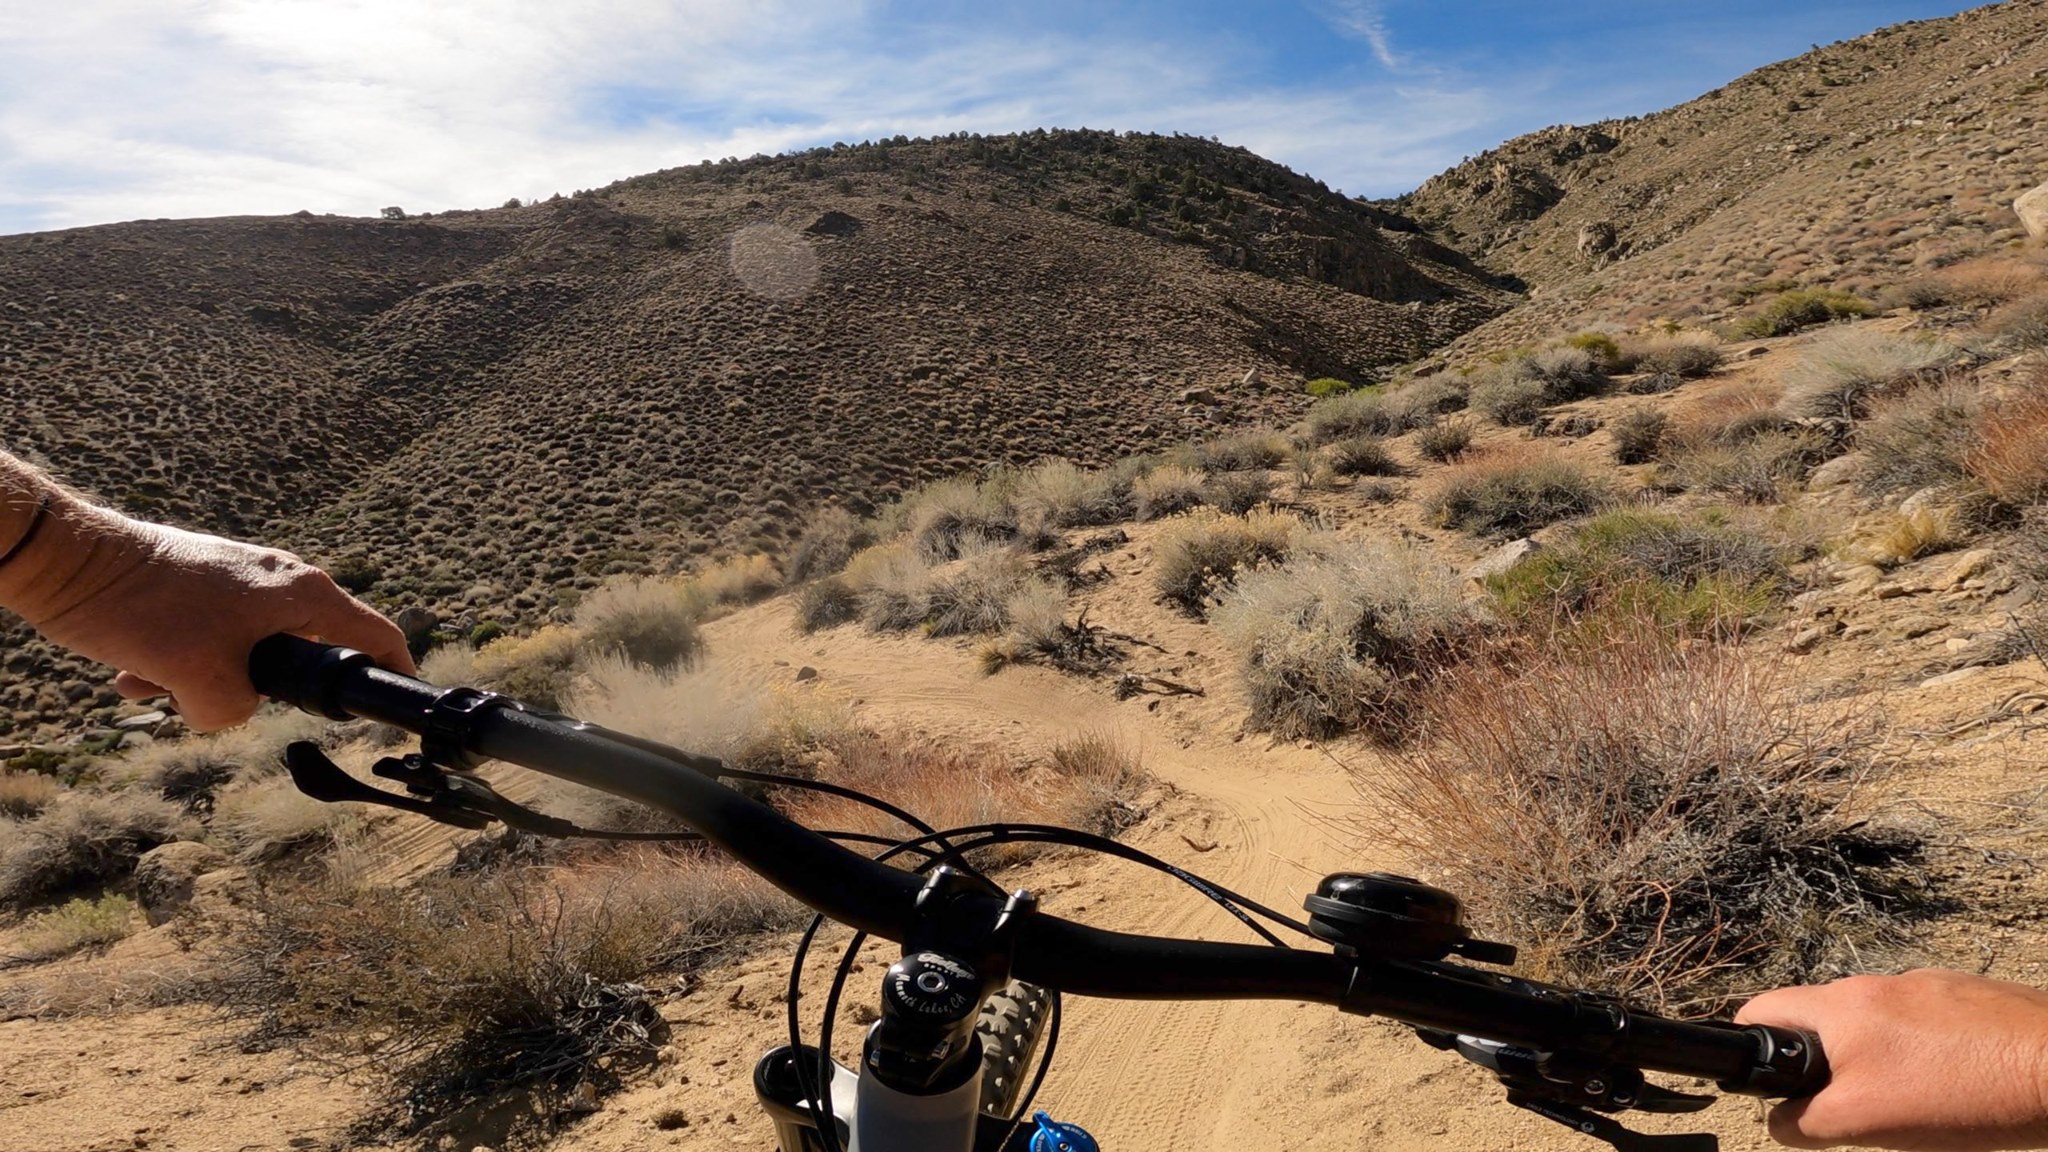 Riding in the hills above Bishop